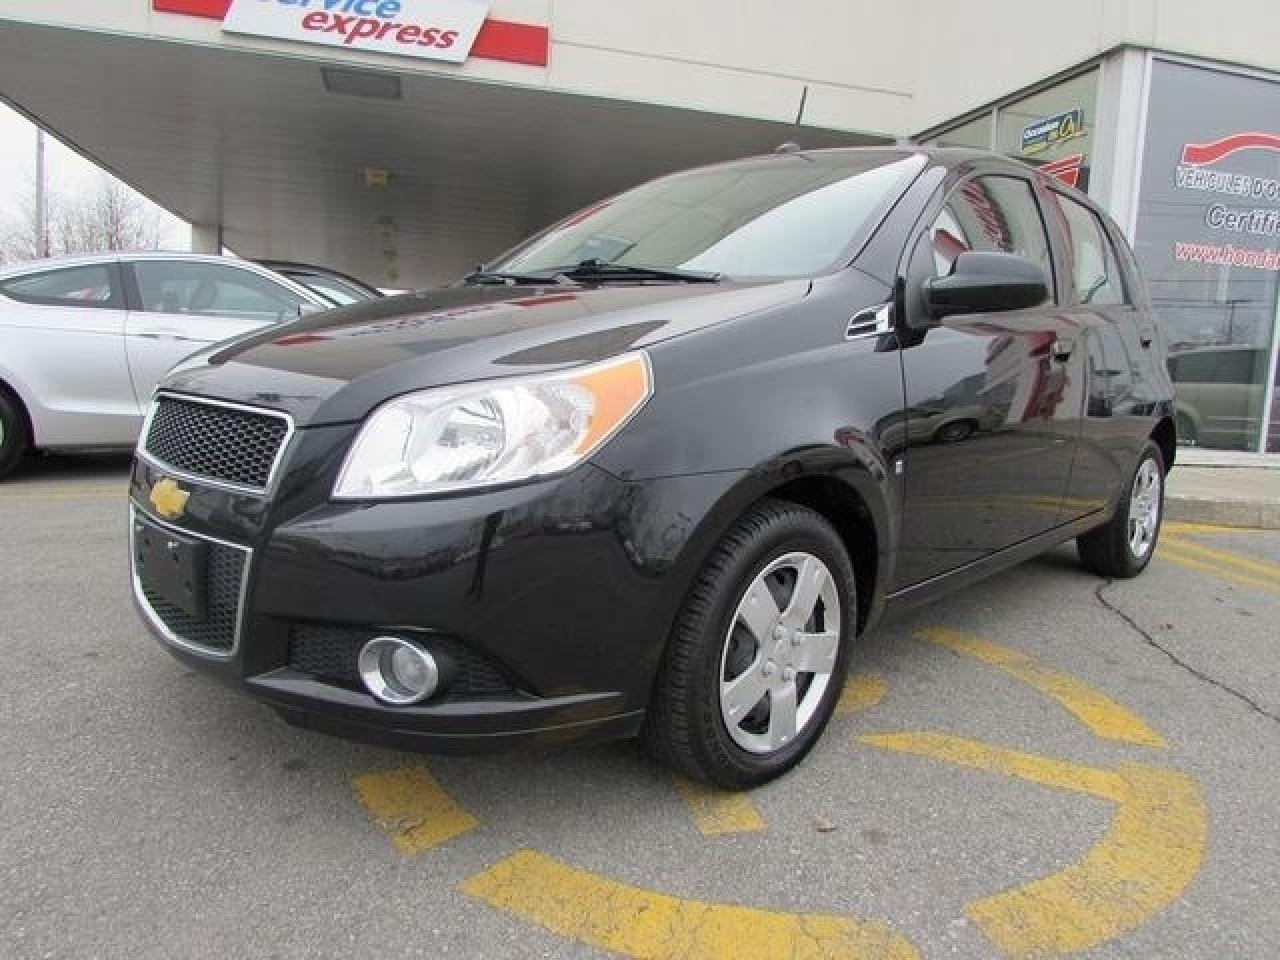 Used 2010 Chevrolet Aveo LT for Sale in Ile Perrot, Quebec